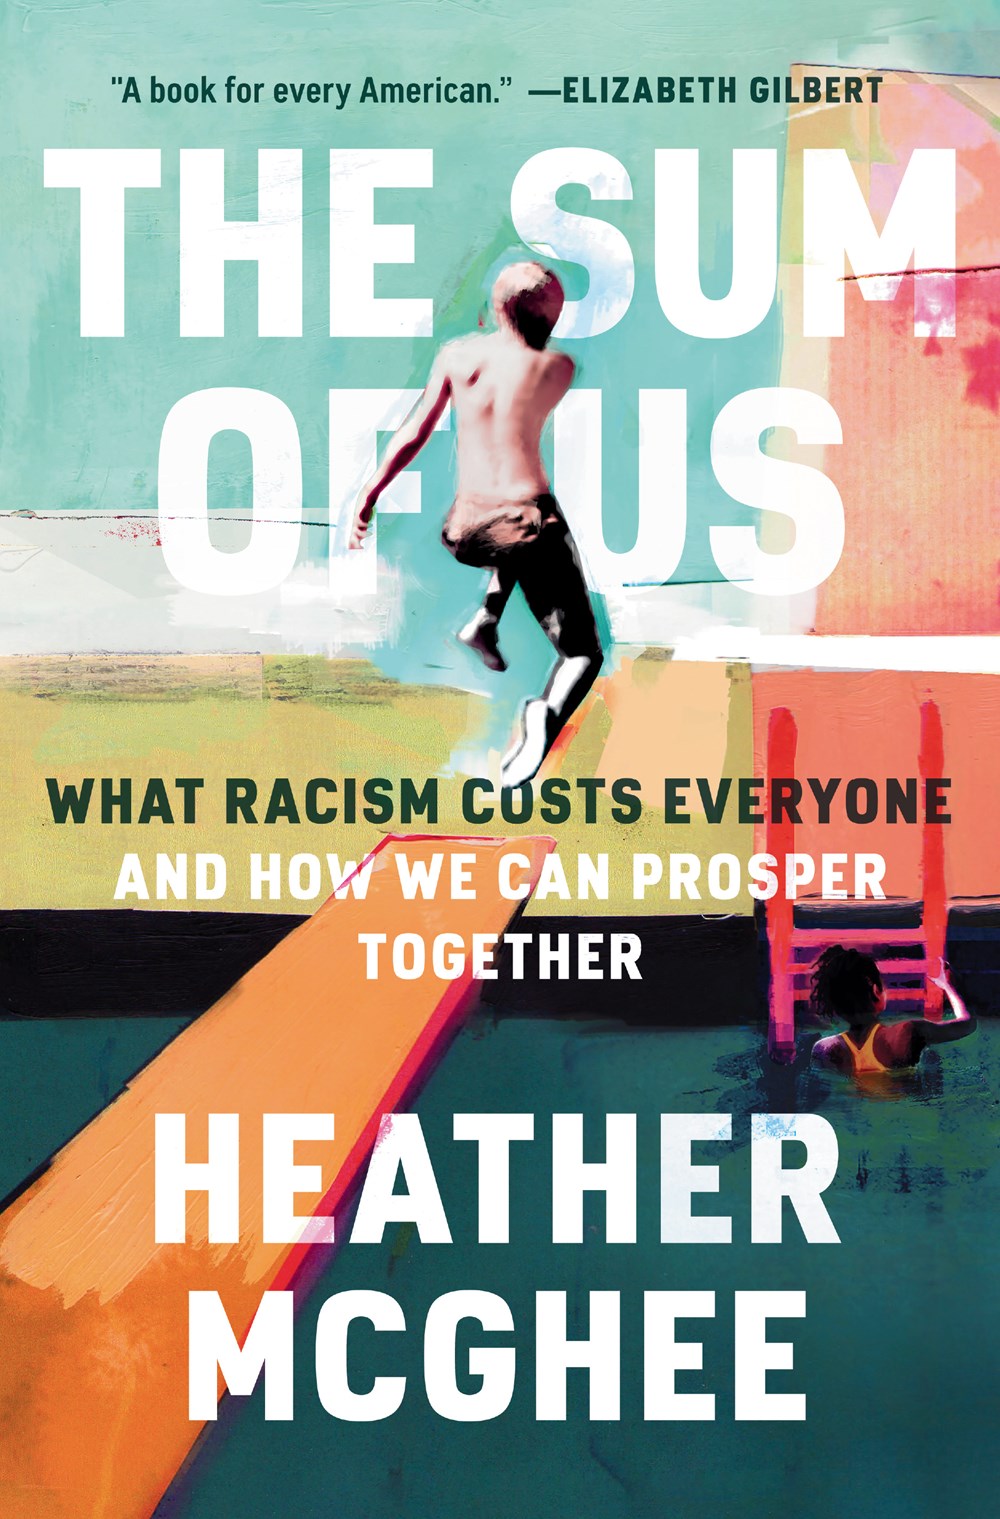 What Racism Costs Everyone, Epidemics and the Law, Whiteness of Wealth, and more in Politics and Law | Academic Best Sellers